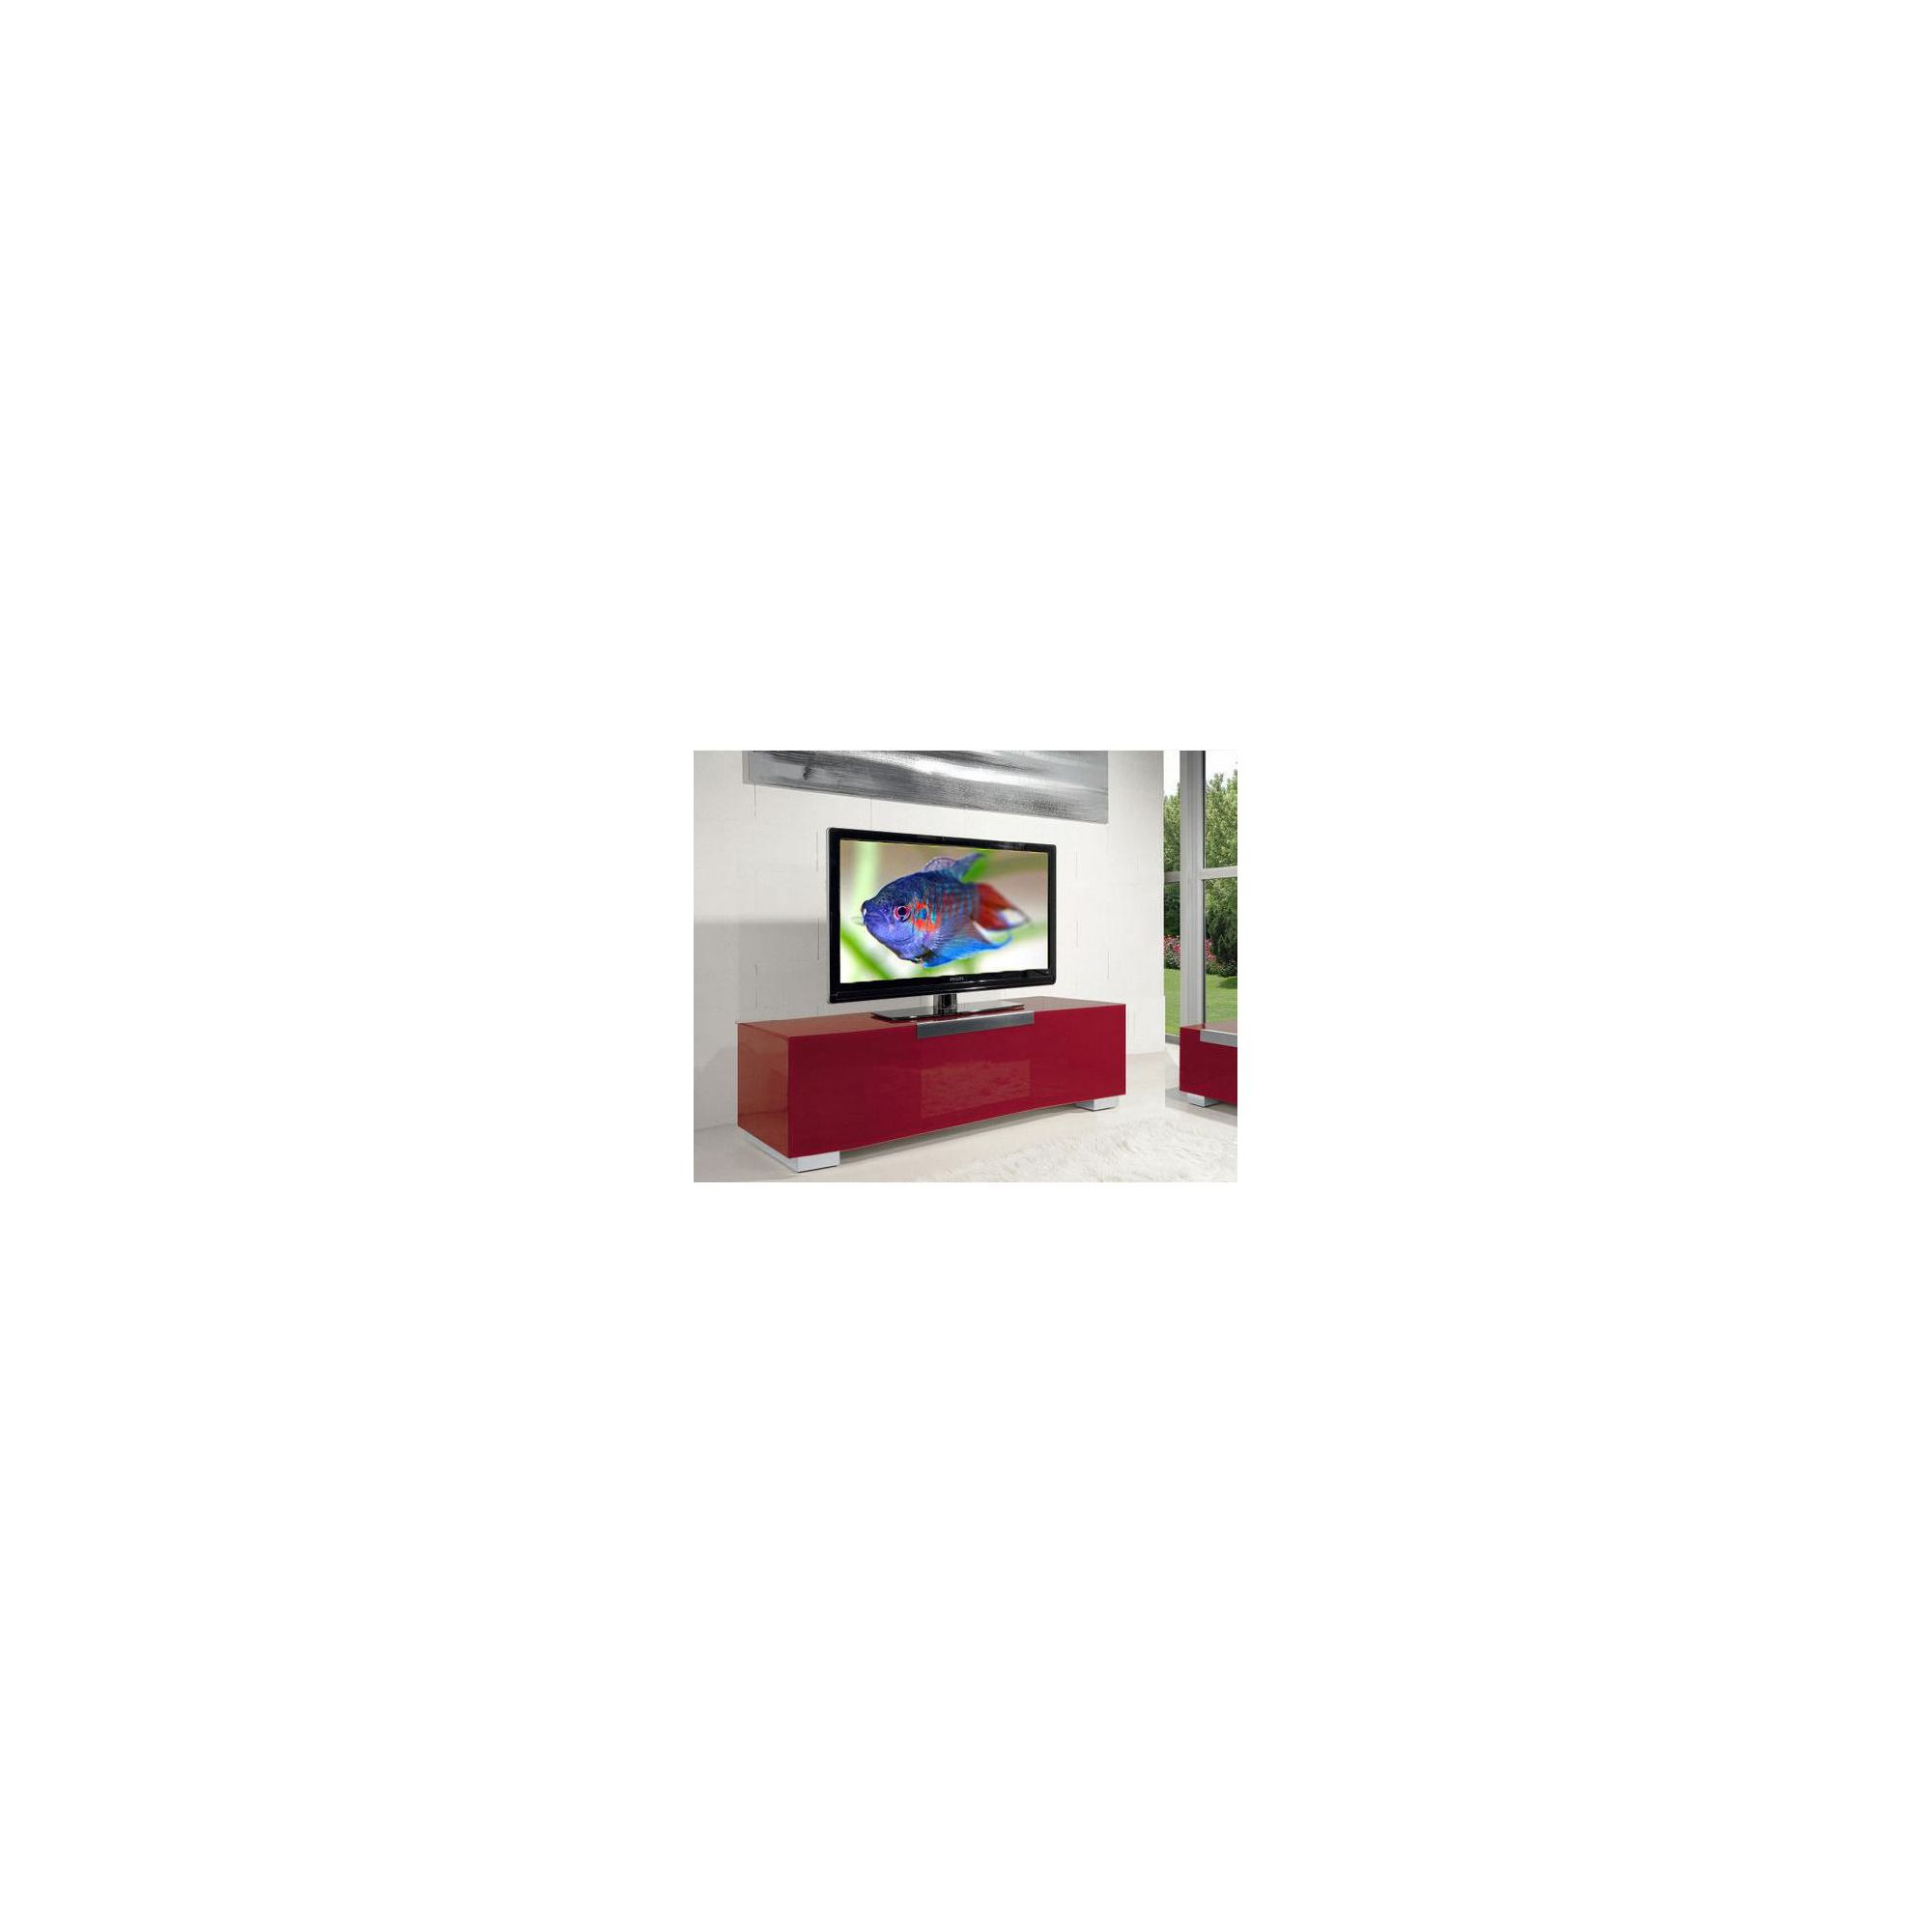 Triskom Stainless Steel / Glass TV Stand for LCD / Plasmas - Red Glass at Tesco Direct